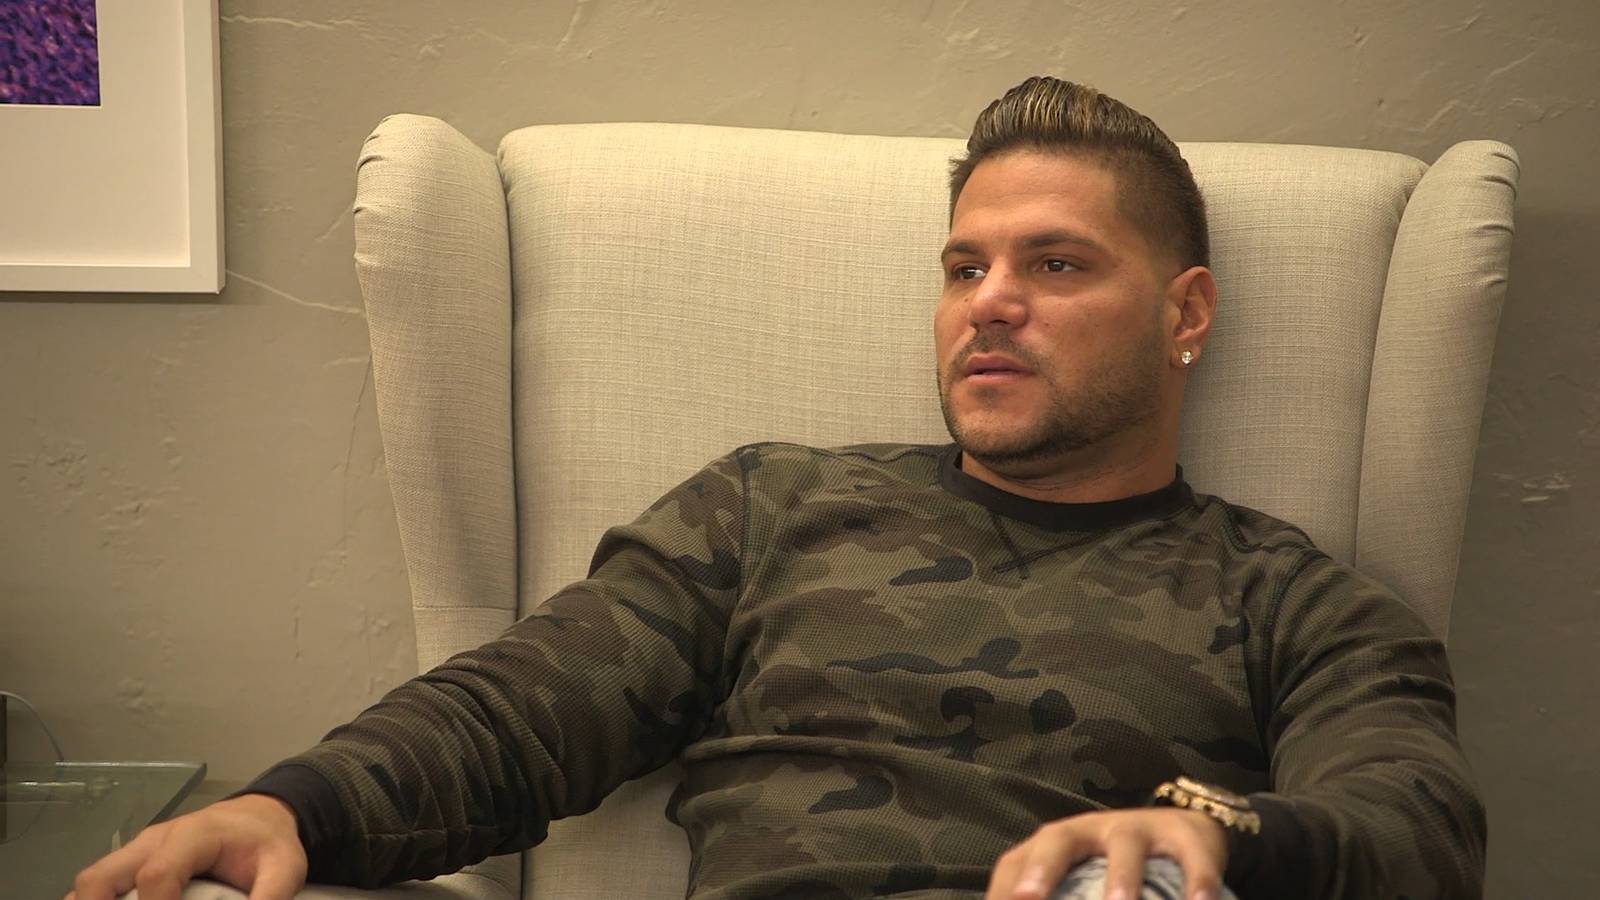 'Jersey Shore: Family Vacation' star Ronnie Ortiz-Magro in an episode from season 1 of the MTV series